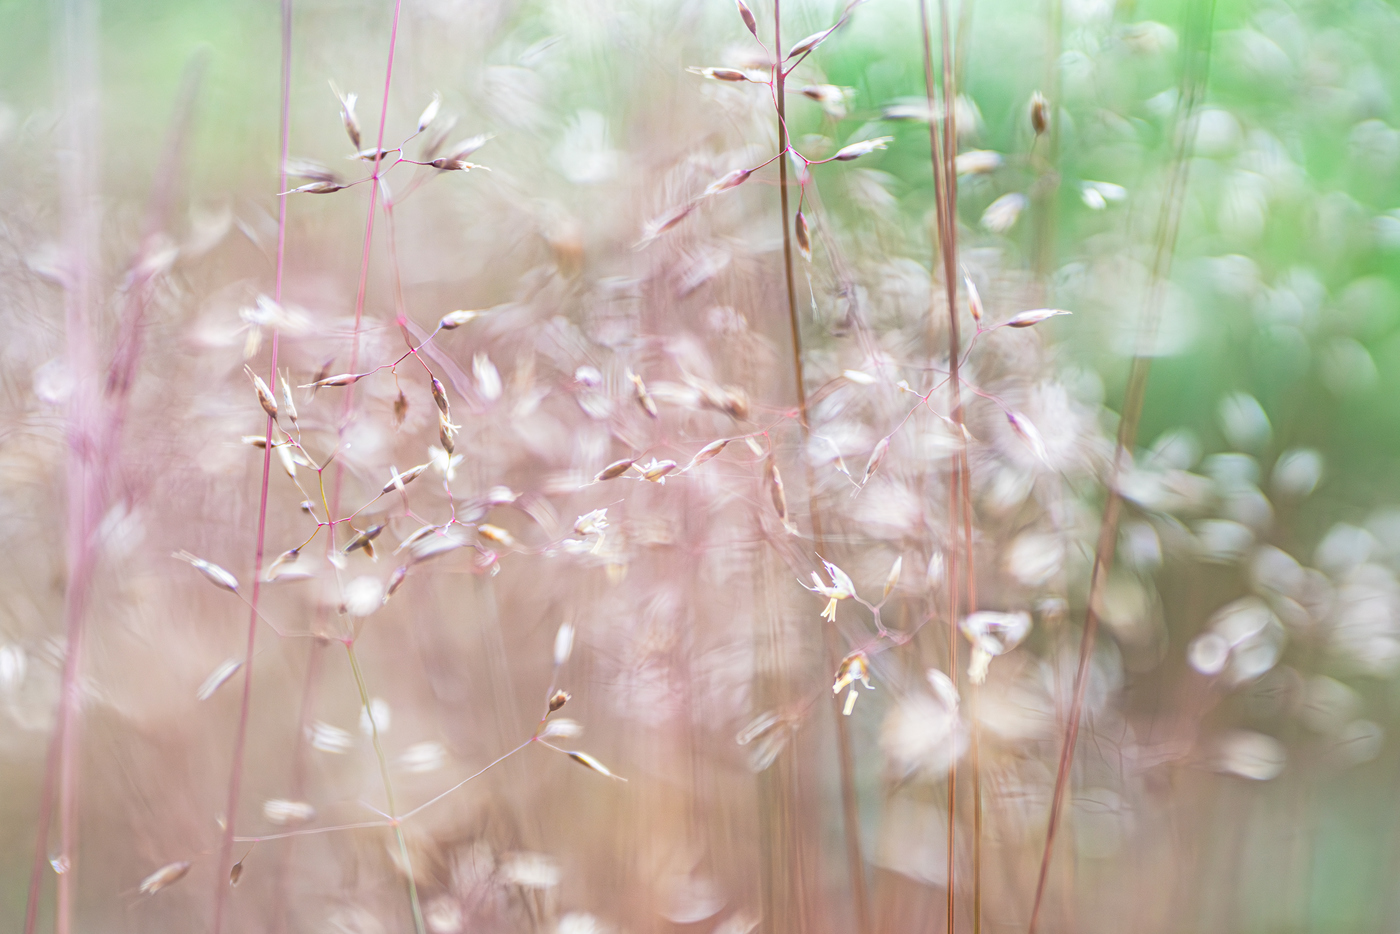 This is a soft-focus image of delicate, slender grass stems and seed heads, with hints of pink and green hues blending into a dreamy backdrop, evoking a gentle, serene atmosphere typical of a North Yorkshire meadow. a close up of some grass